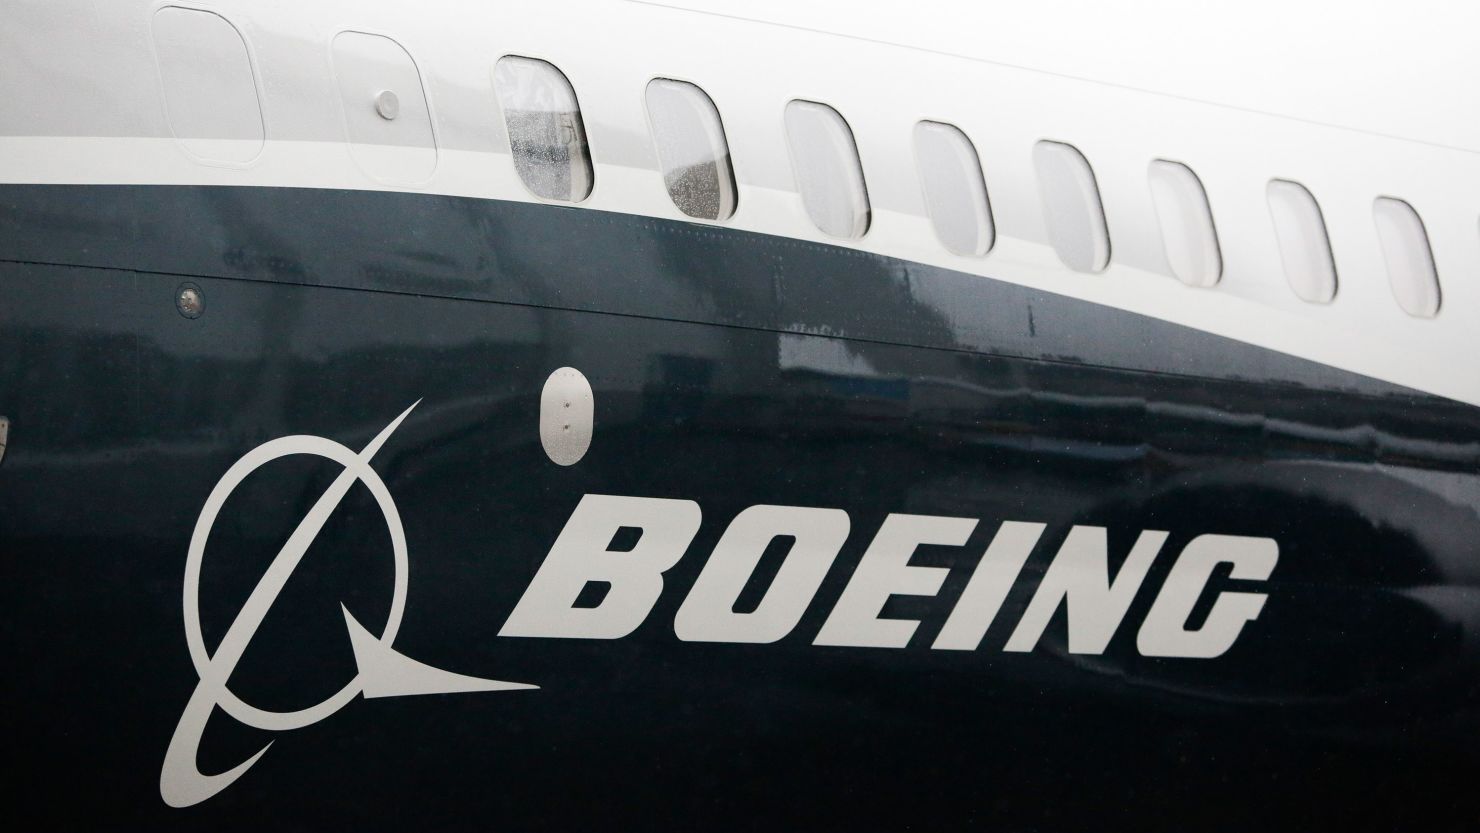 The Boeing logo on the first Boeing 737 MAX 9 airplane is pictured during its rollout for media at the Boeing factory in Renton, Washington on March 7, 2017.  / AFP PHOTO / Jason Redmond        (Photo credit should read JASON REDMOND/AFP via Getty Images)